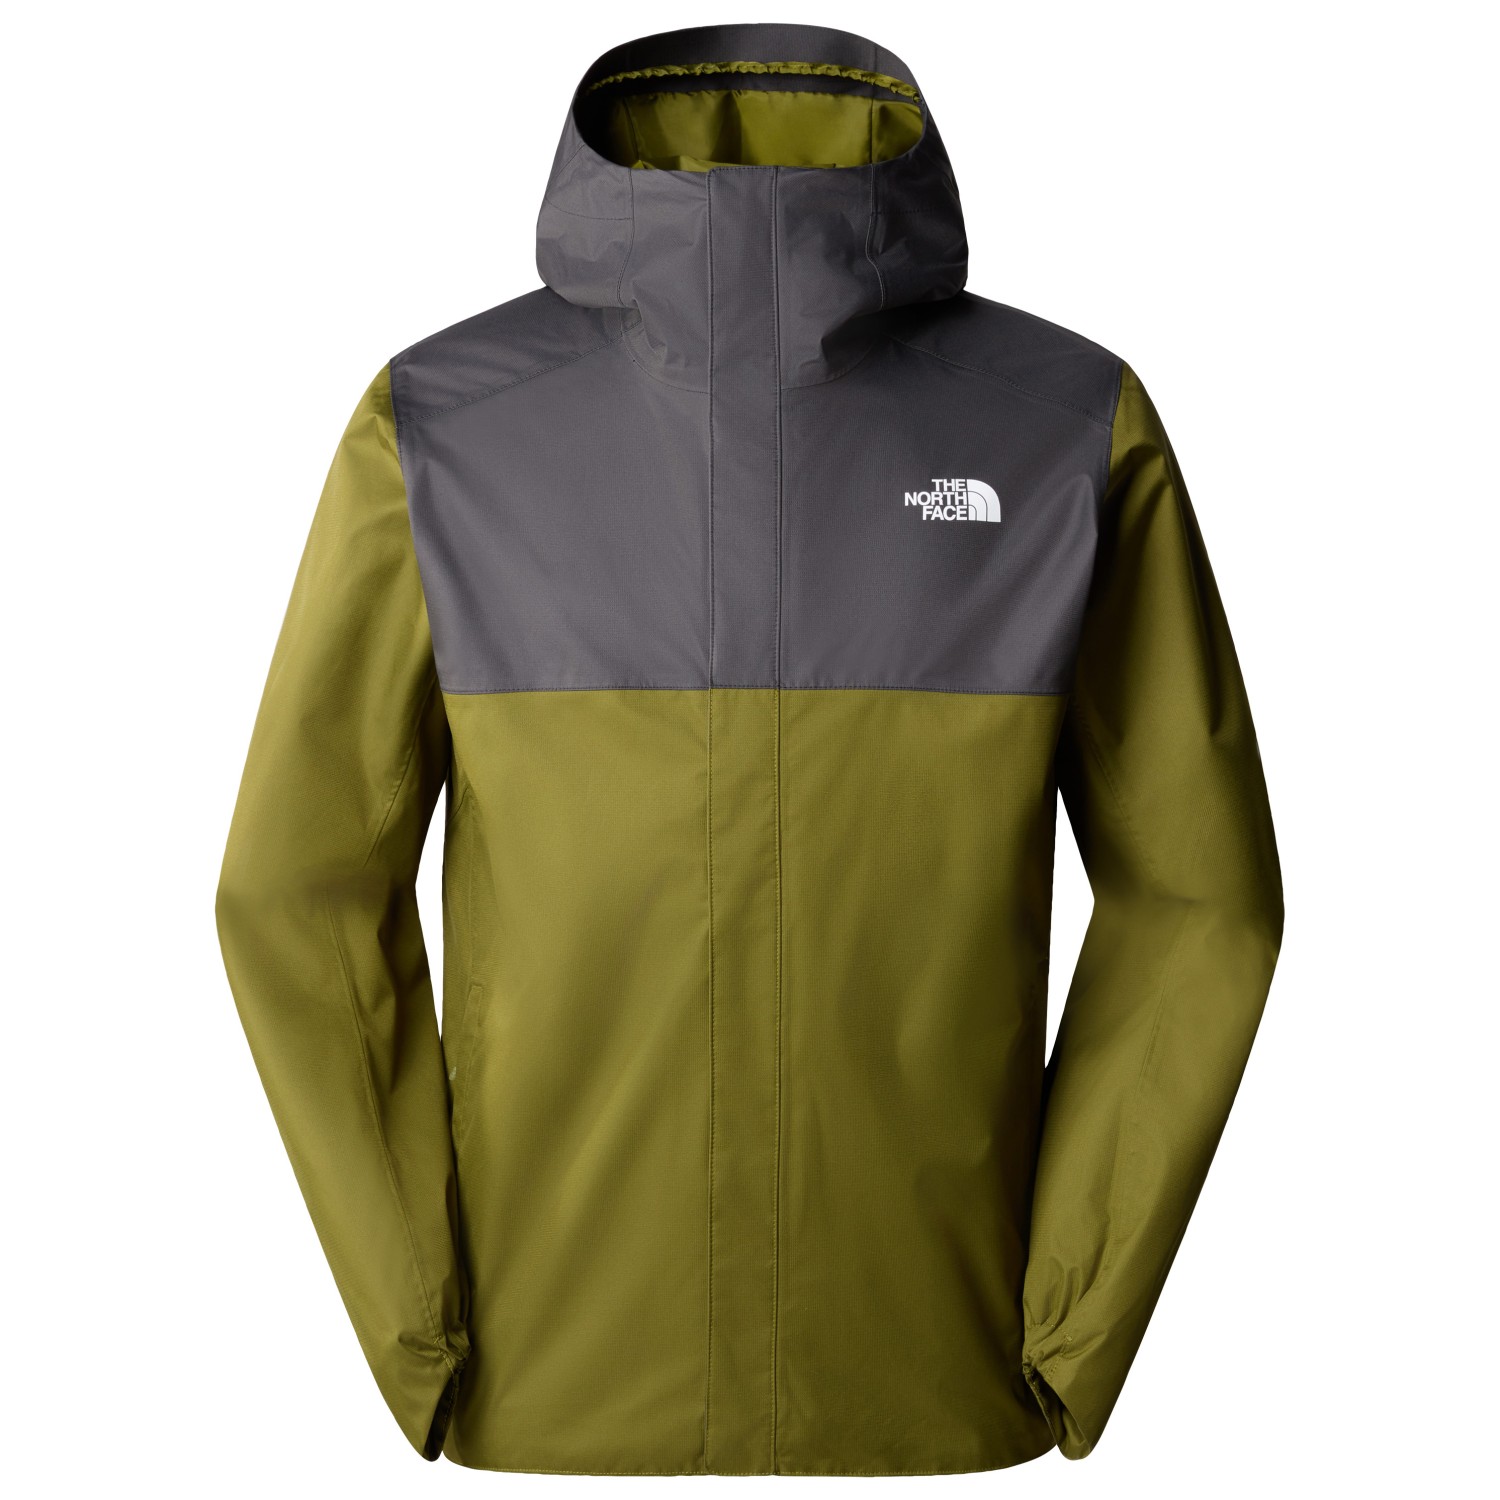 Дождевик The North Face Quest Zip In, цвет Forest Olive/Asphalt Grey зимняя куртка the north face women s quest insulated цвет boysenberry